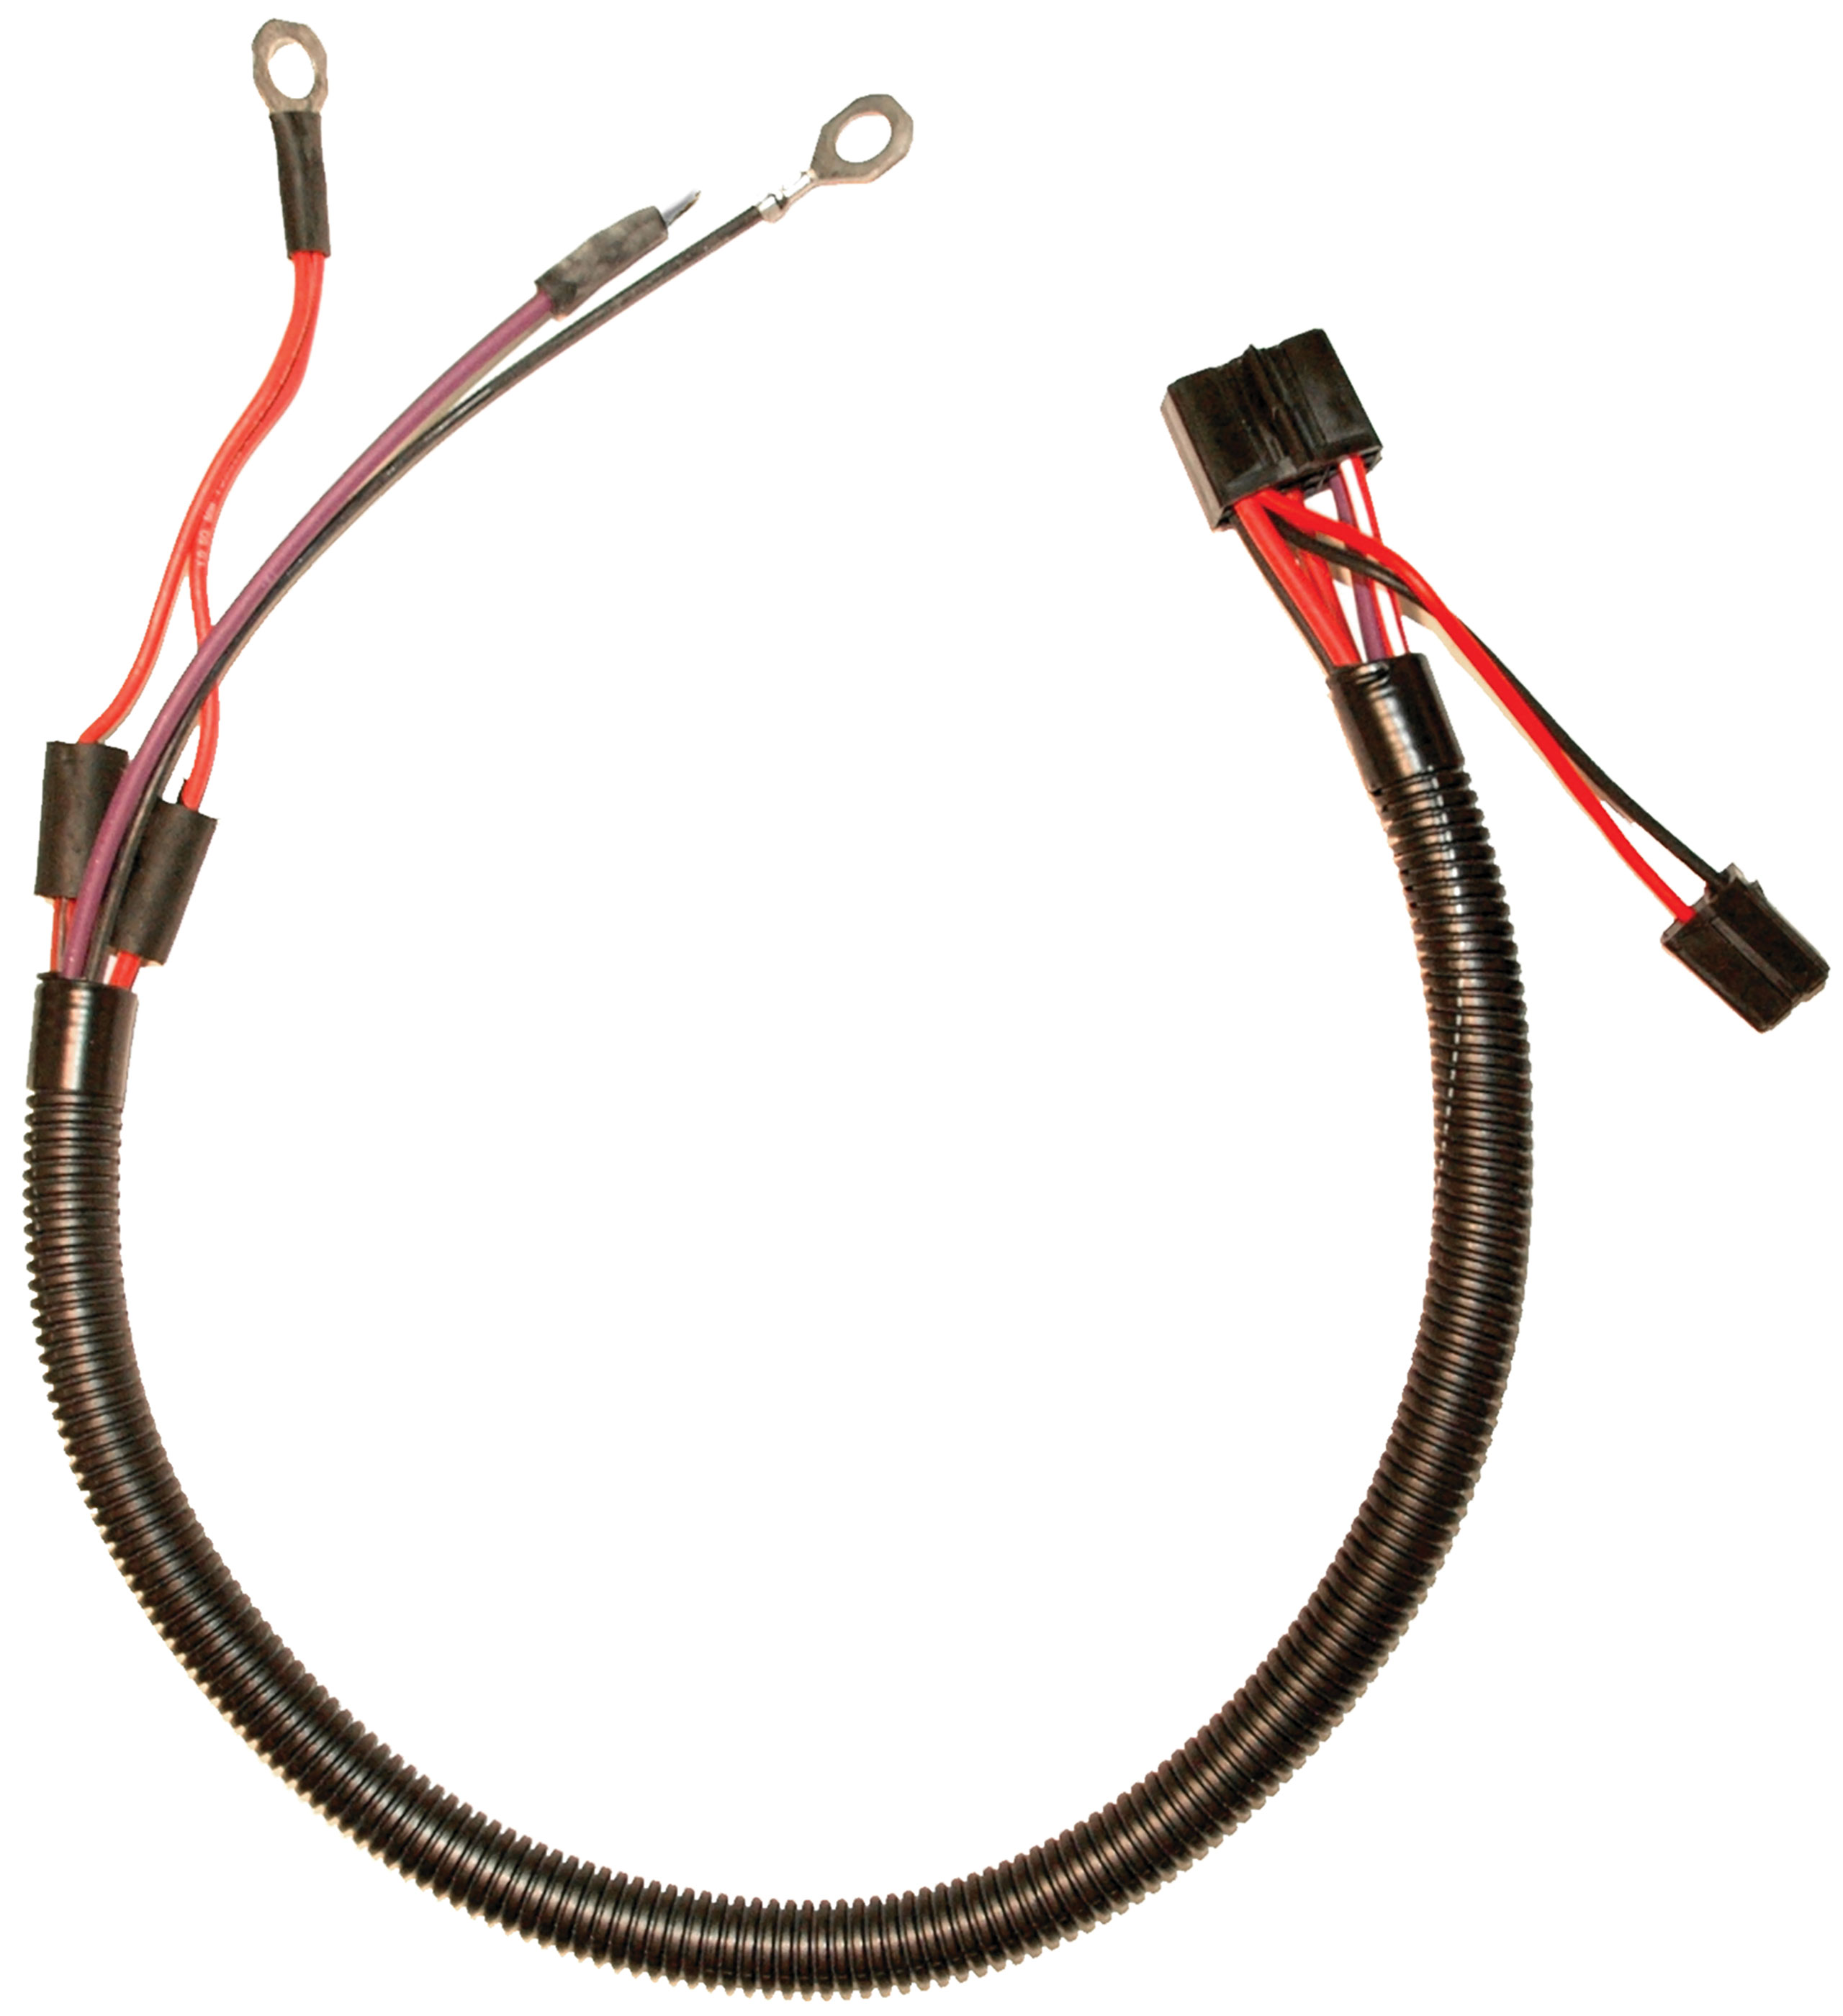 C3 1979 Chevrolet Corvette Harness. Starter Extension W/Air Conditioning Except L82 - Lectric Limited, Inc.